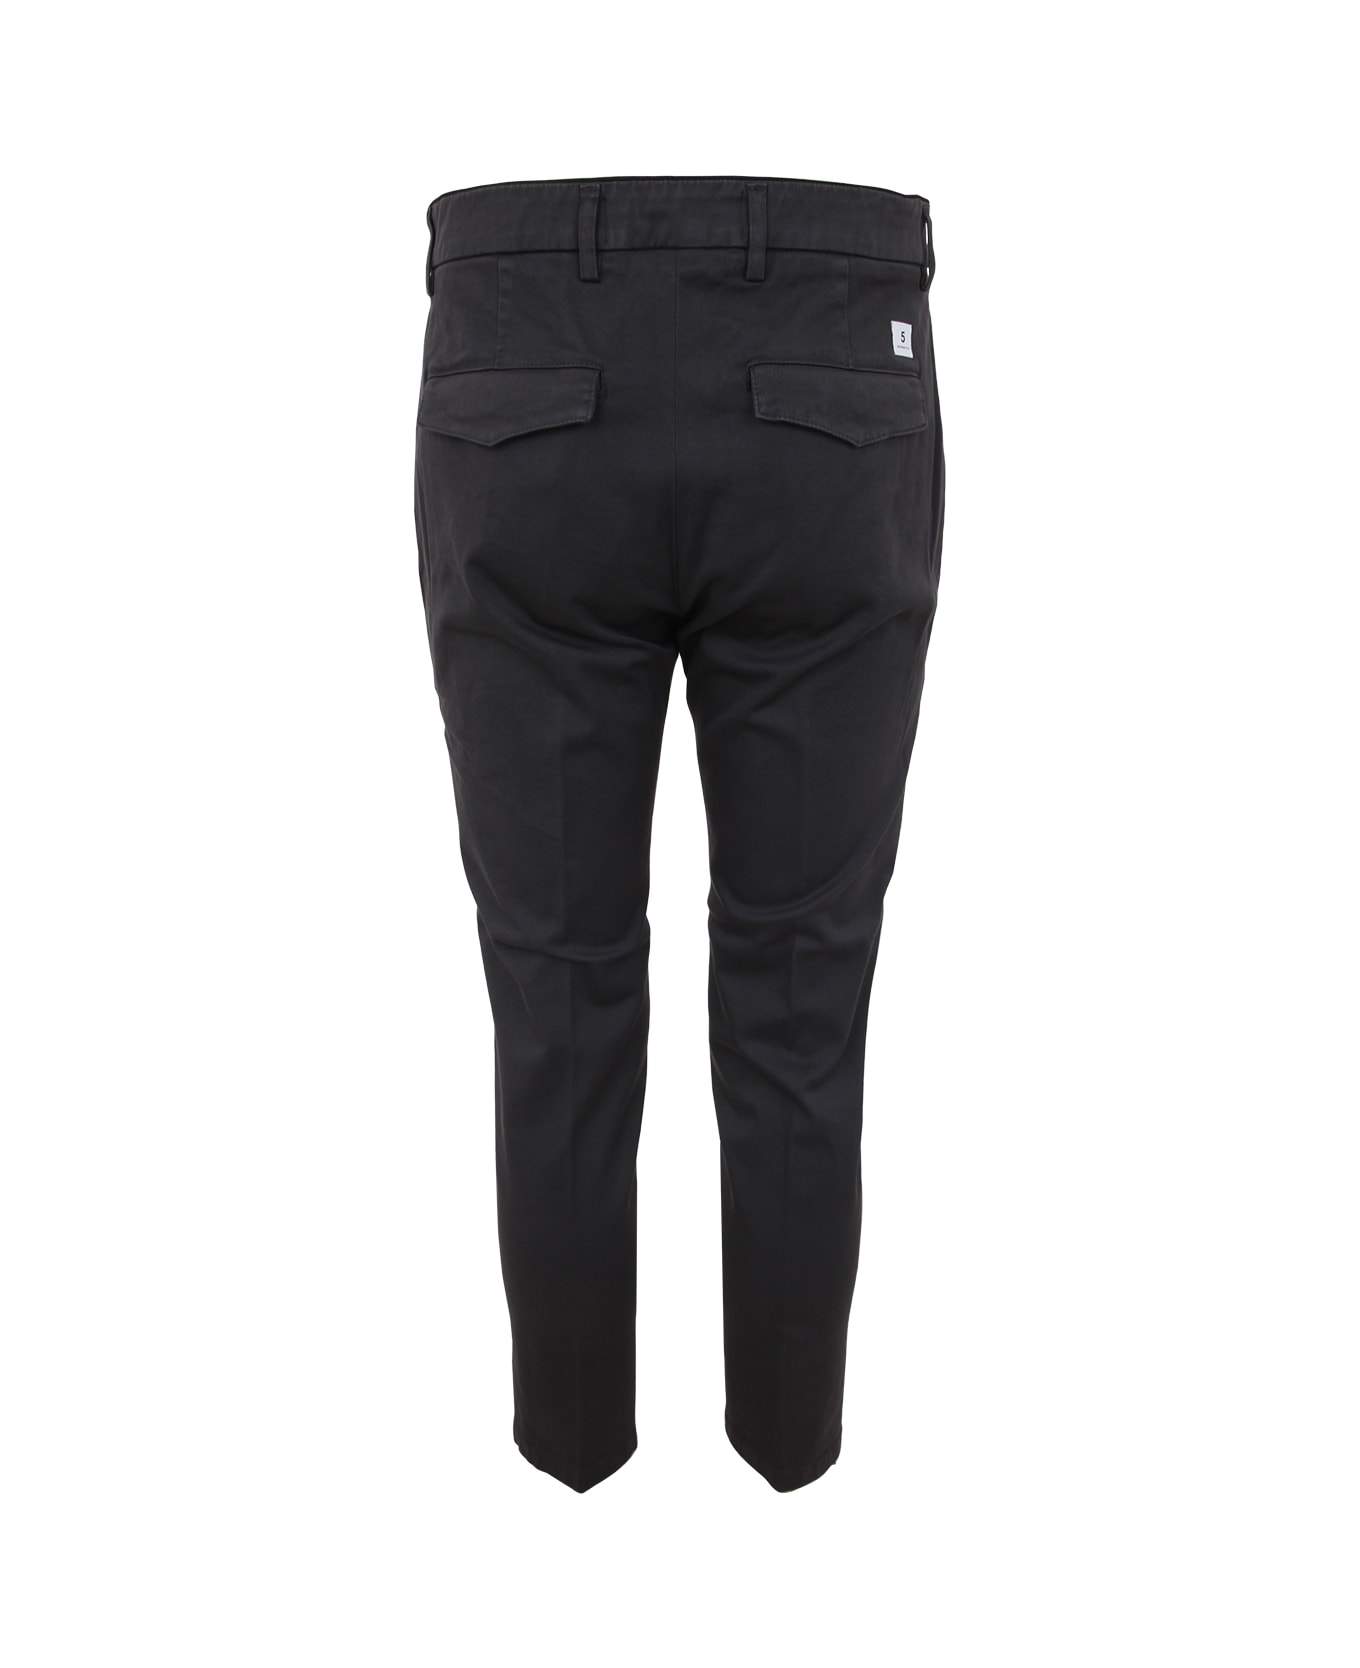 Department Five Prince Chinos Crop Trousers - Iron